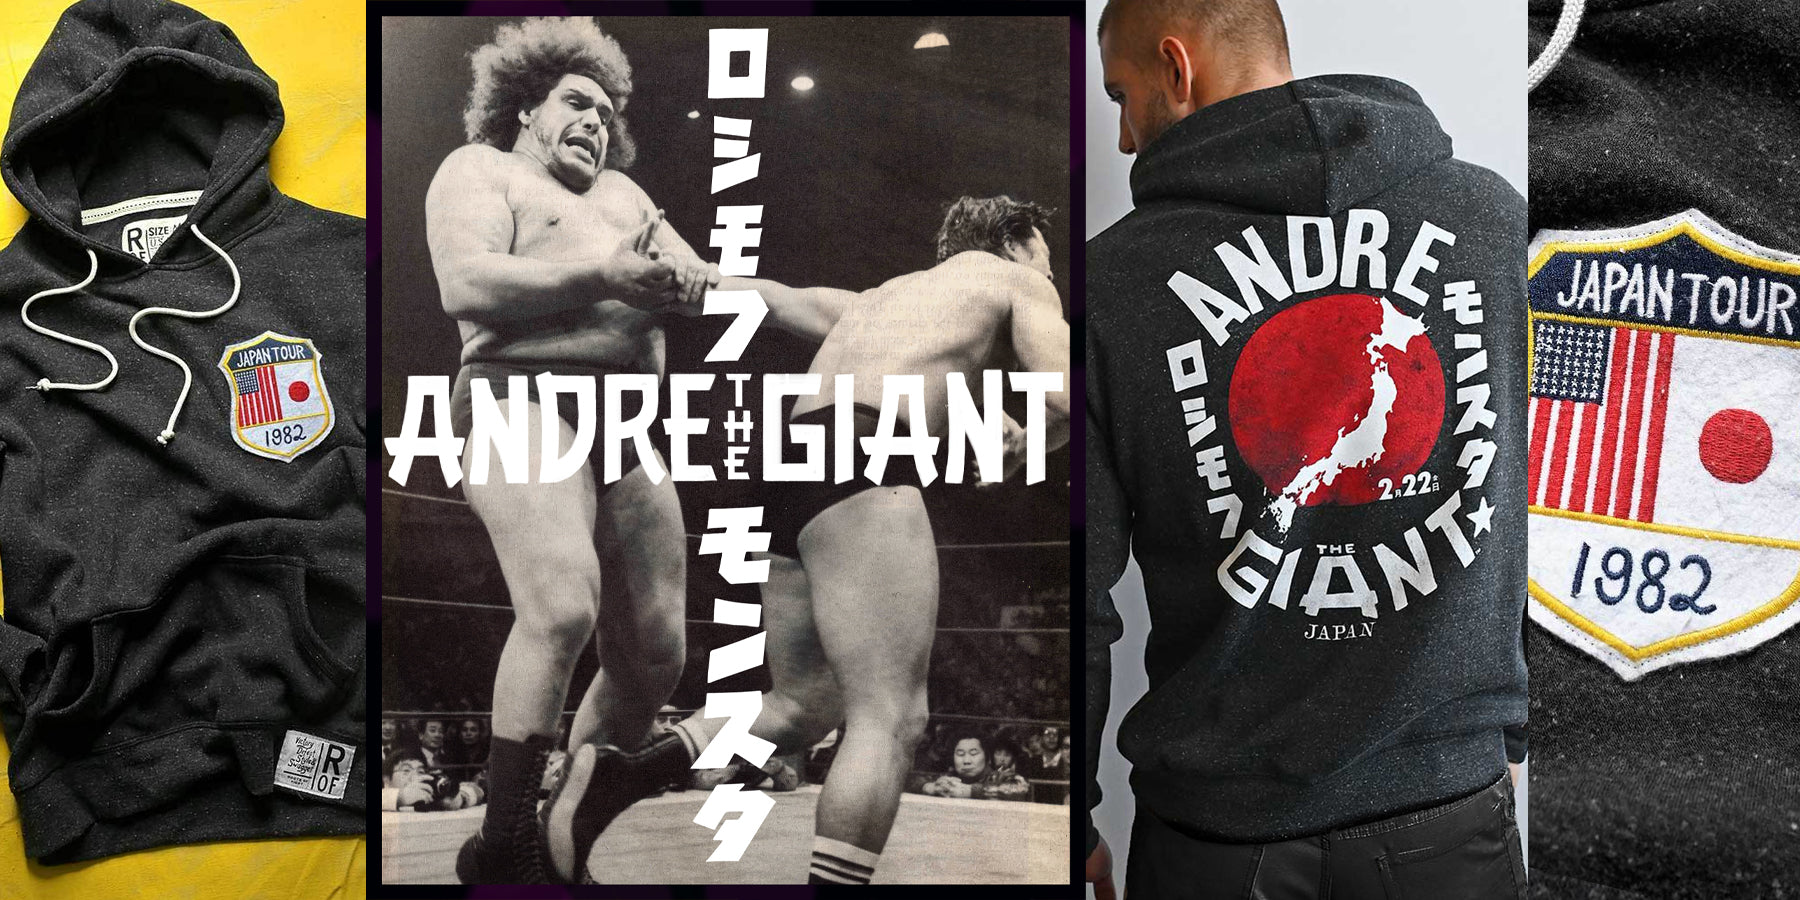 Collage themed on Andre the Giant, including wrestling imagery and Japan tour merchandise.